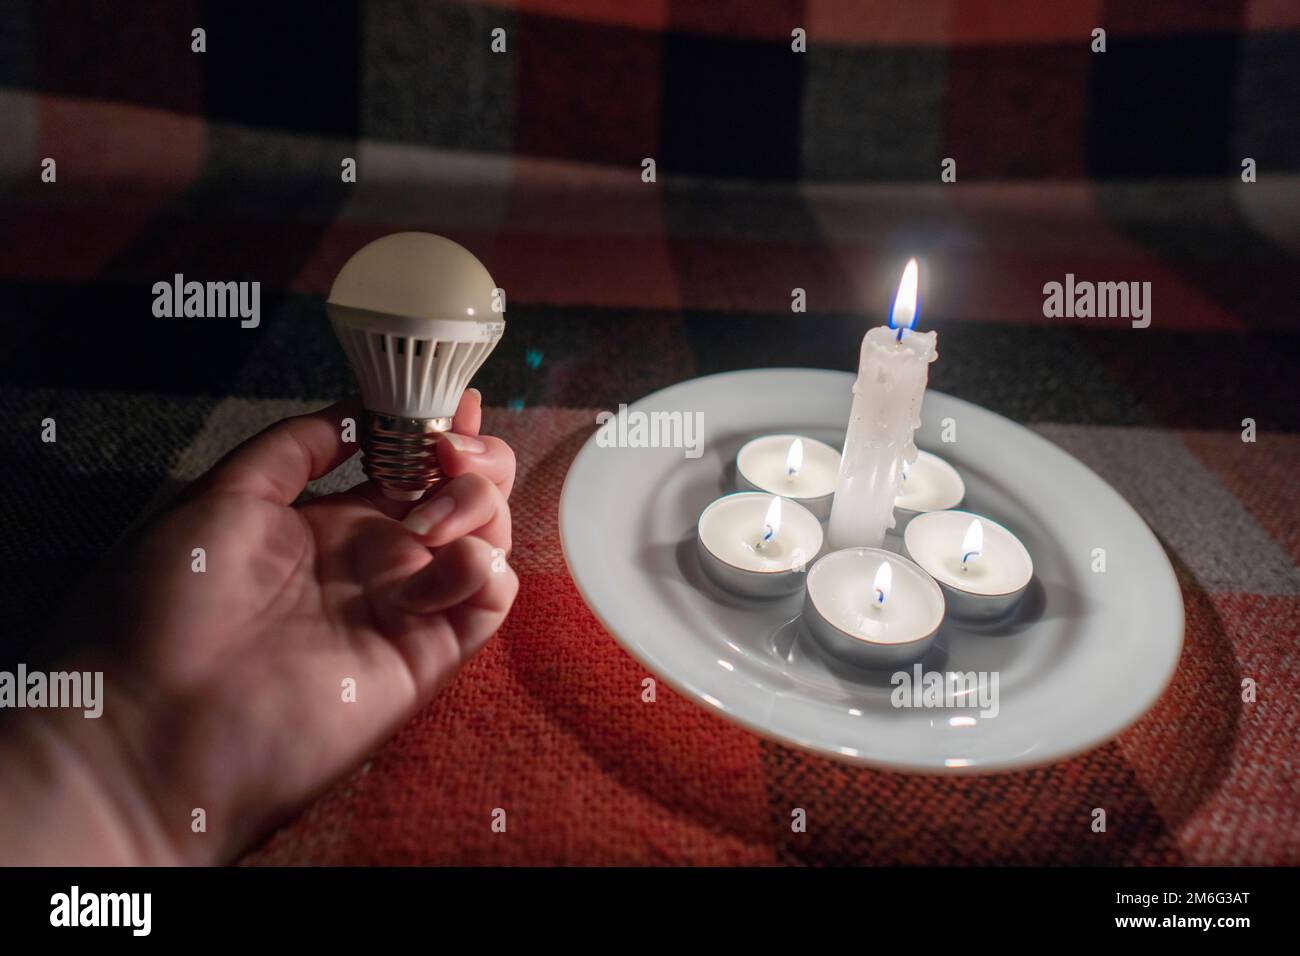 https://c8.alamy.com/comp/2M6G3AT/led-light-bulb-in-hand-against-the-background-of-burning-candles-close-up-power-outage-concept-blackout-energy-crisis-2M6G3AT.jpg